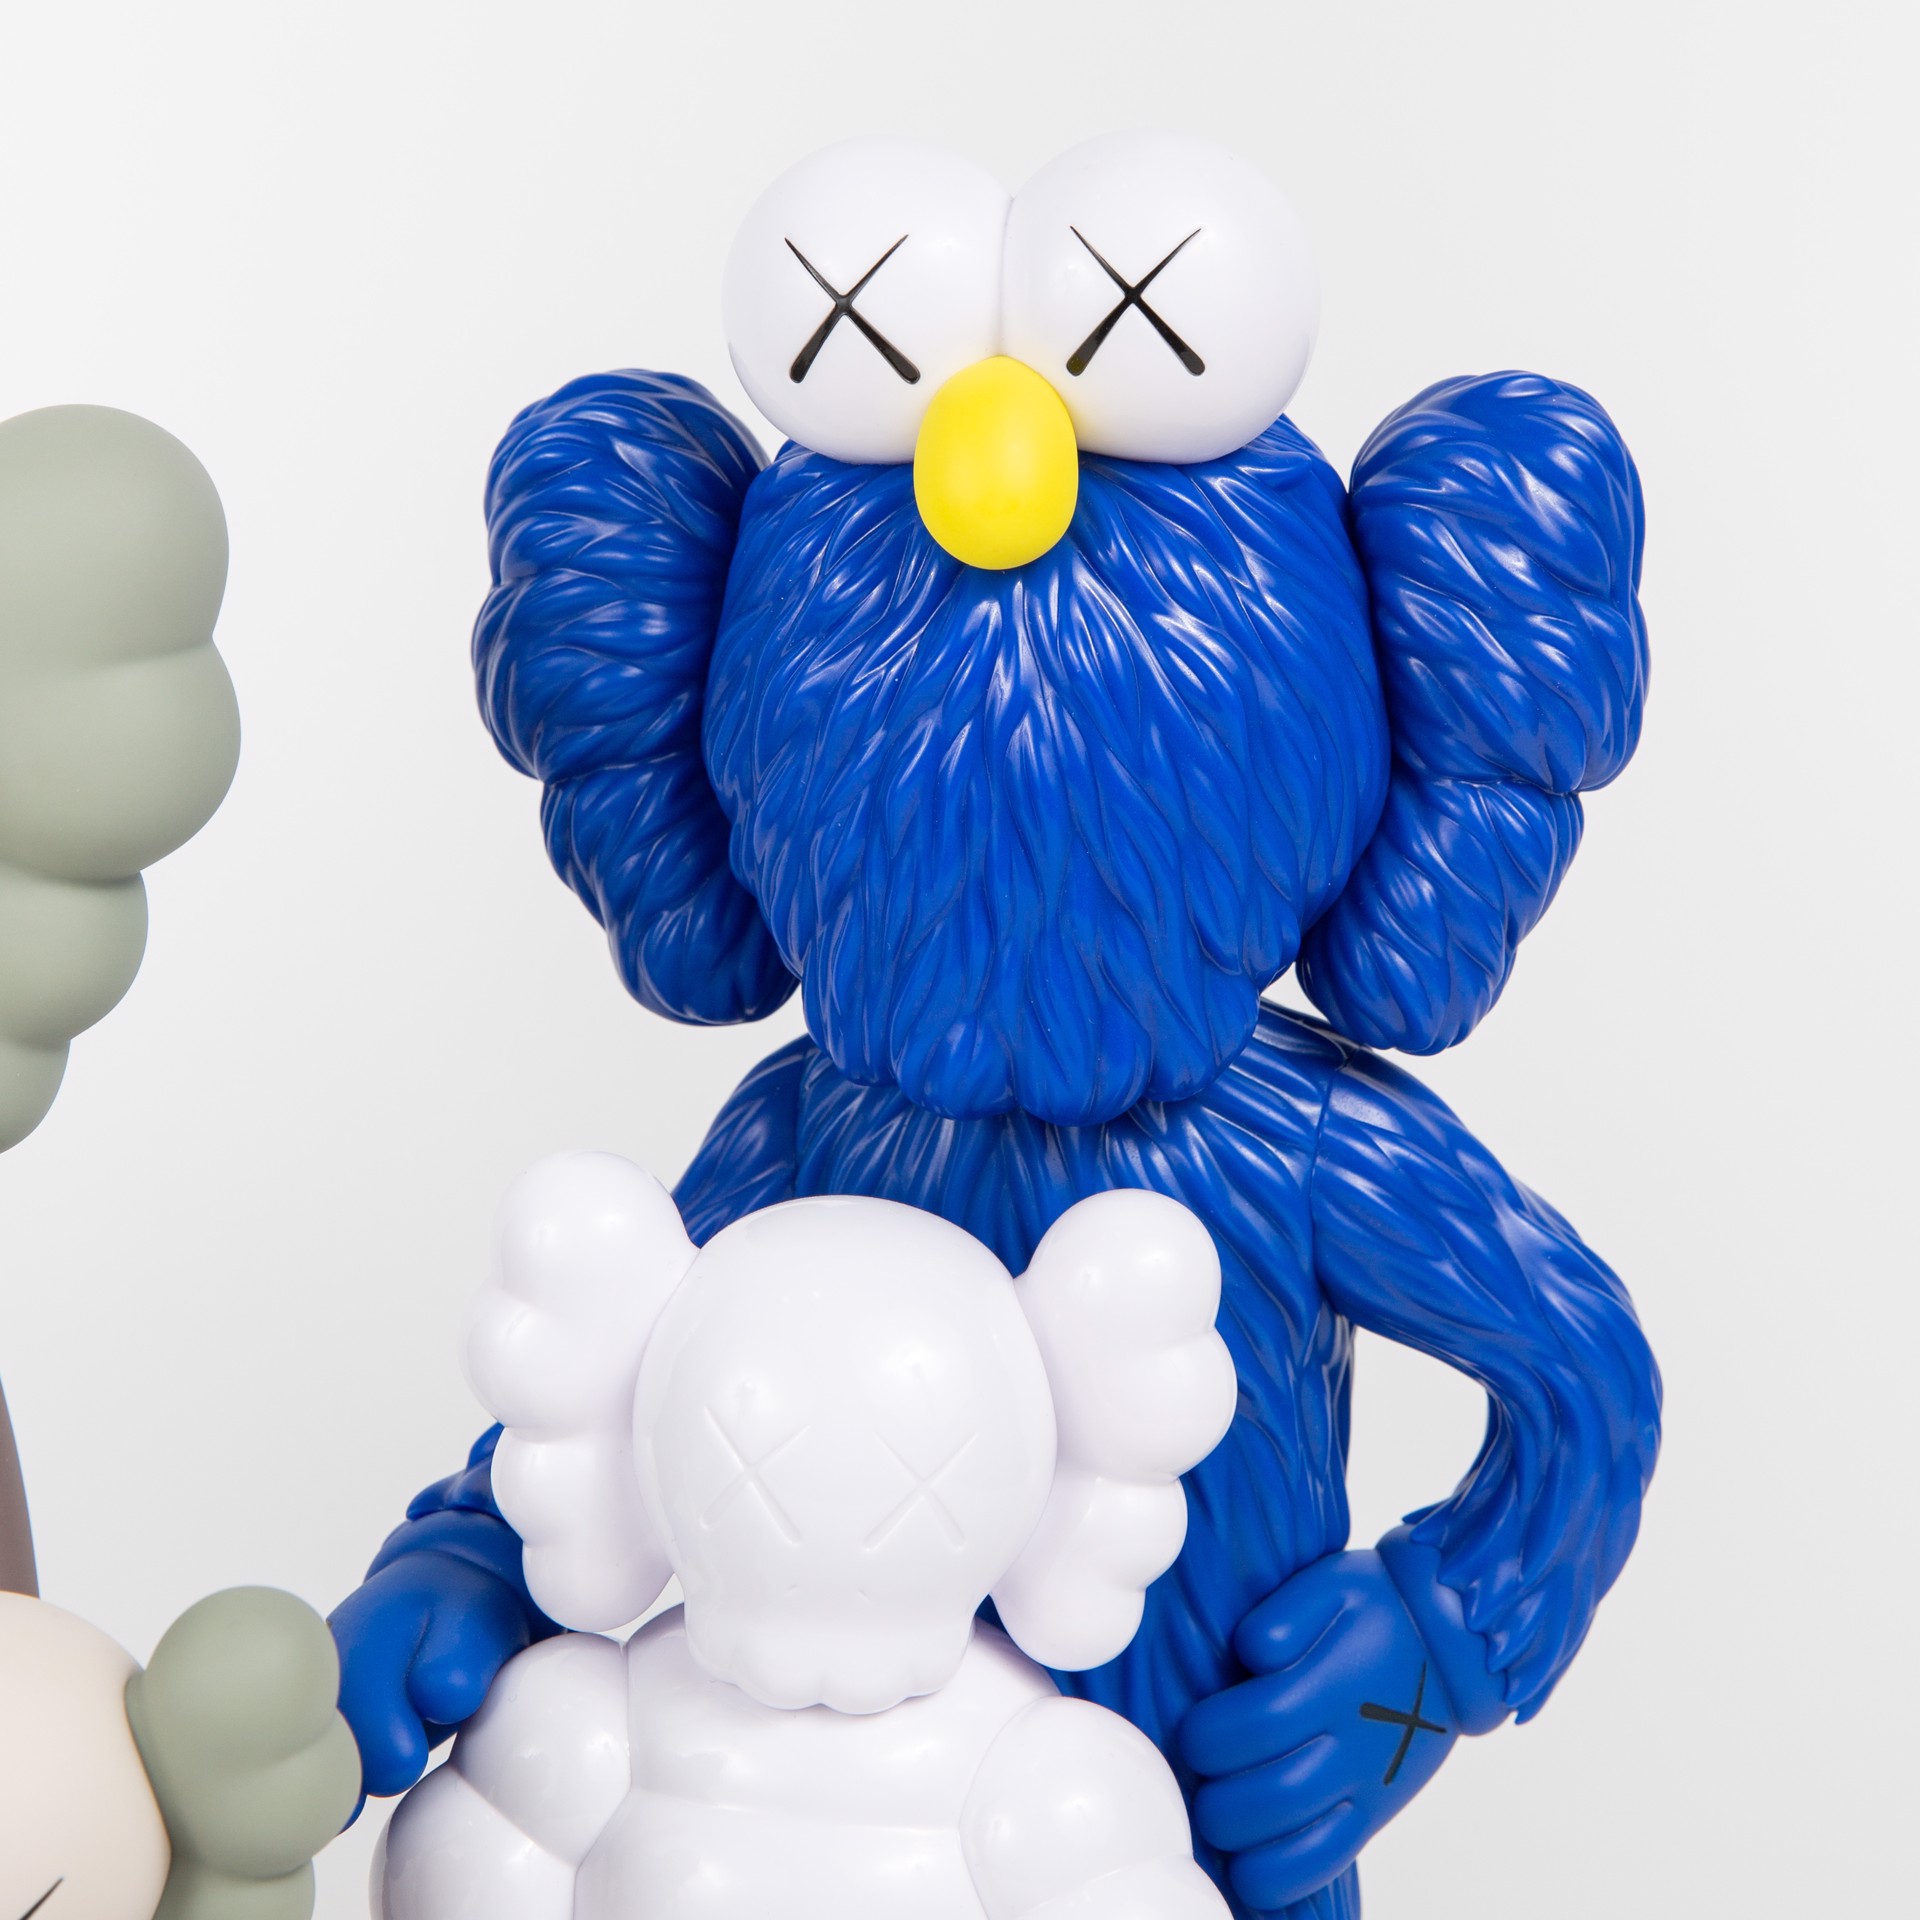 Family (Brown) by Kaws